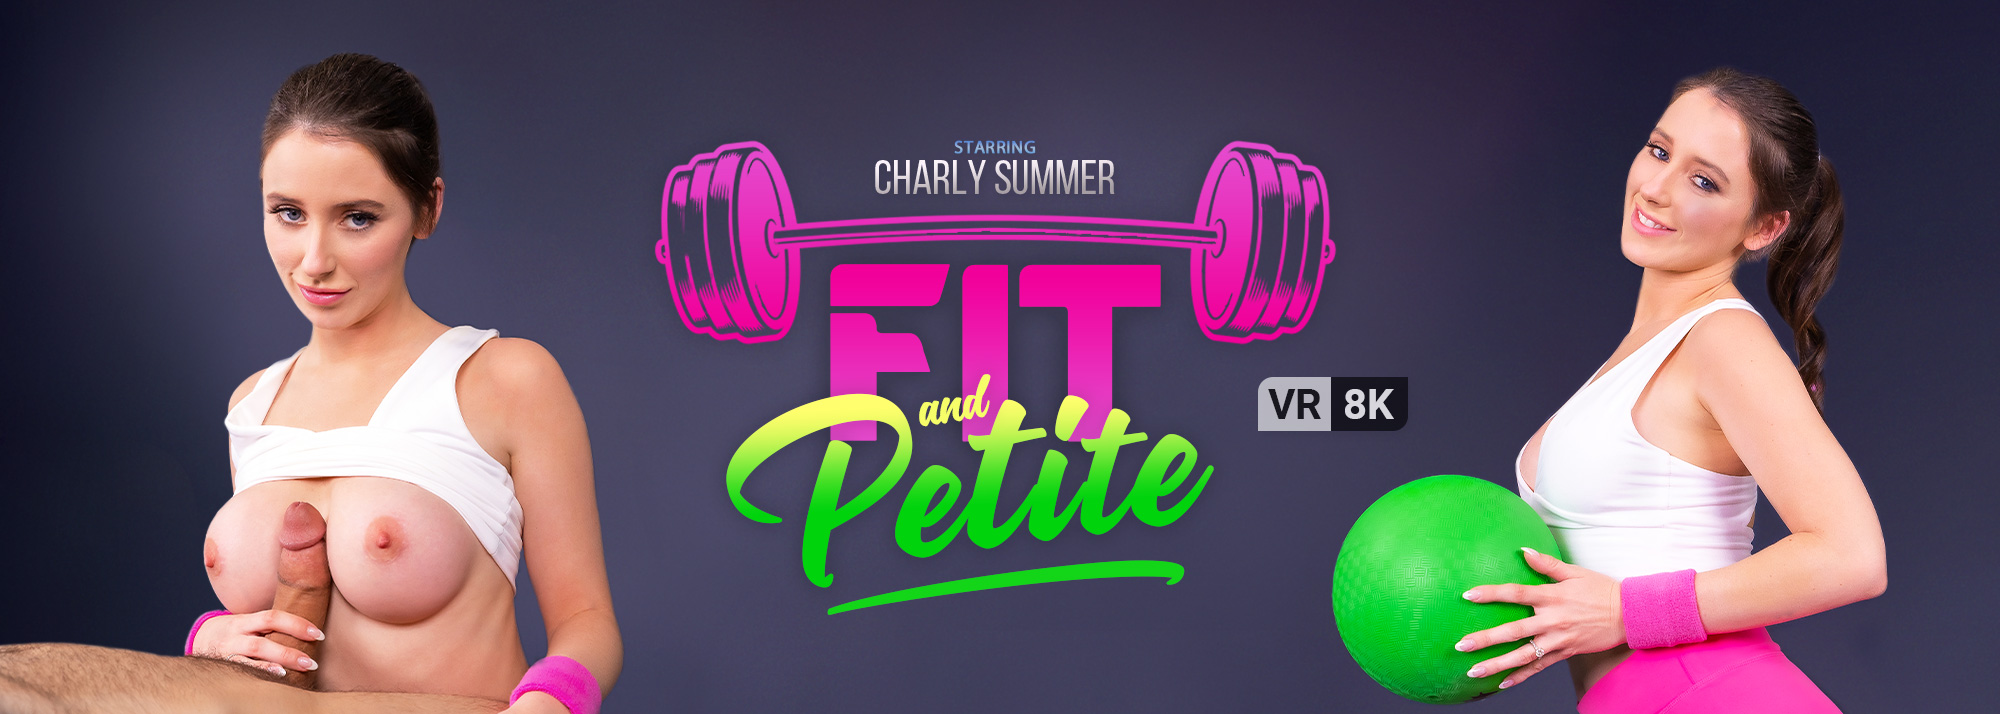 Fit And Petite VR Porn Video: 8K, 4K, Full HD and 180/360 POV |  Slideshow